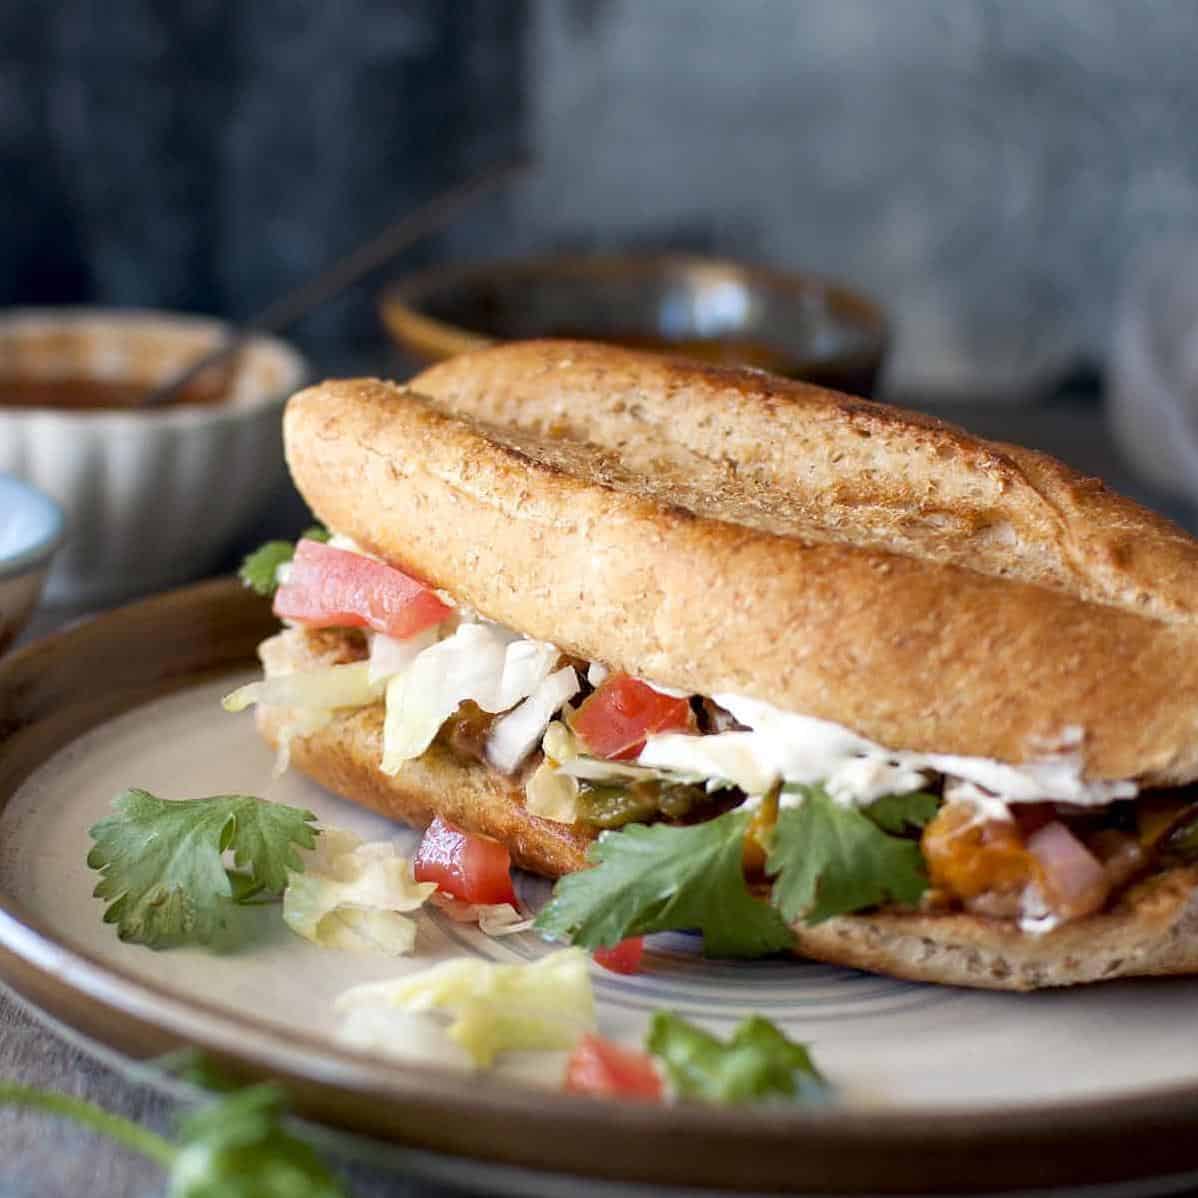  Layer upon layer of deliciousness in this vegetarian torta!